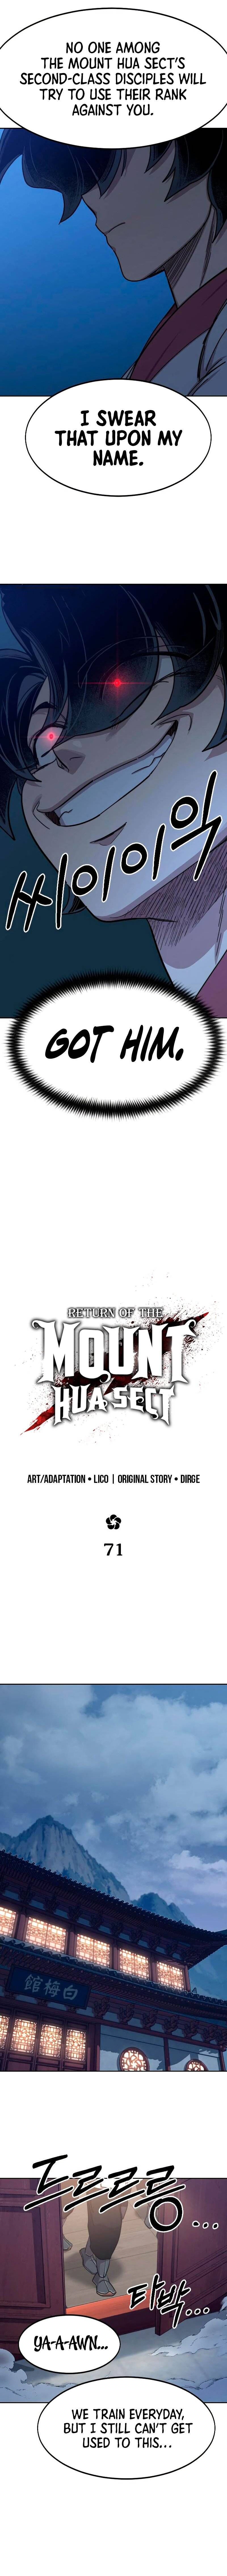 return_of_the_mount_hua_sect_71_8